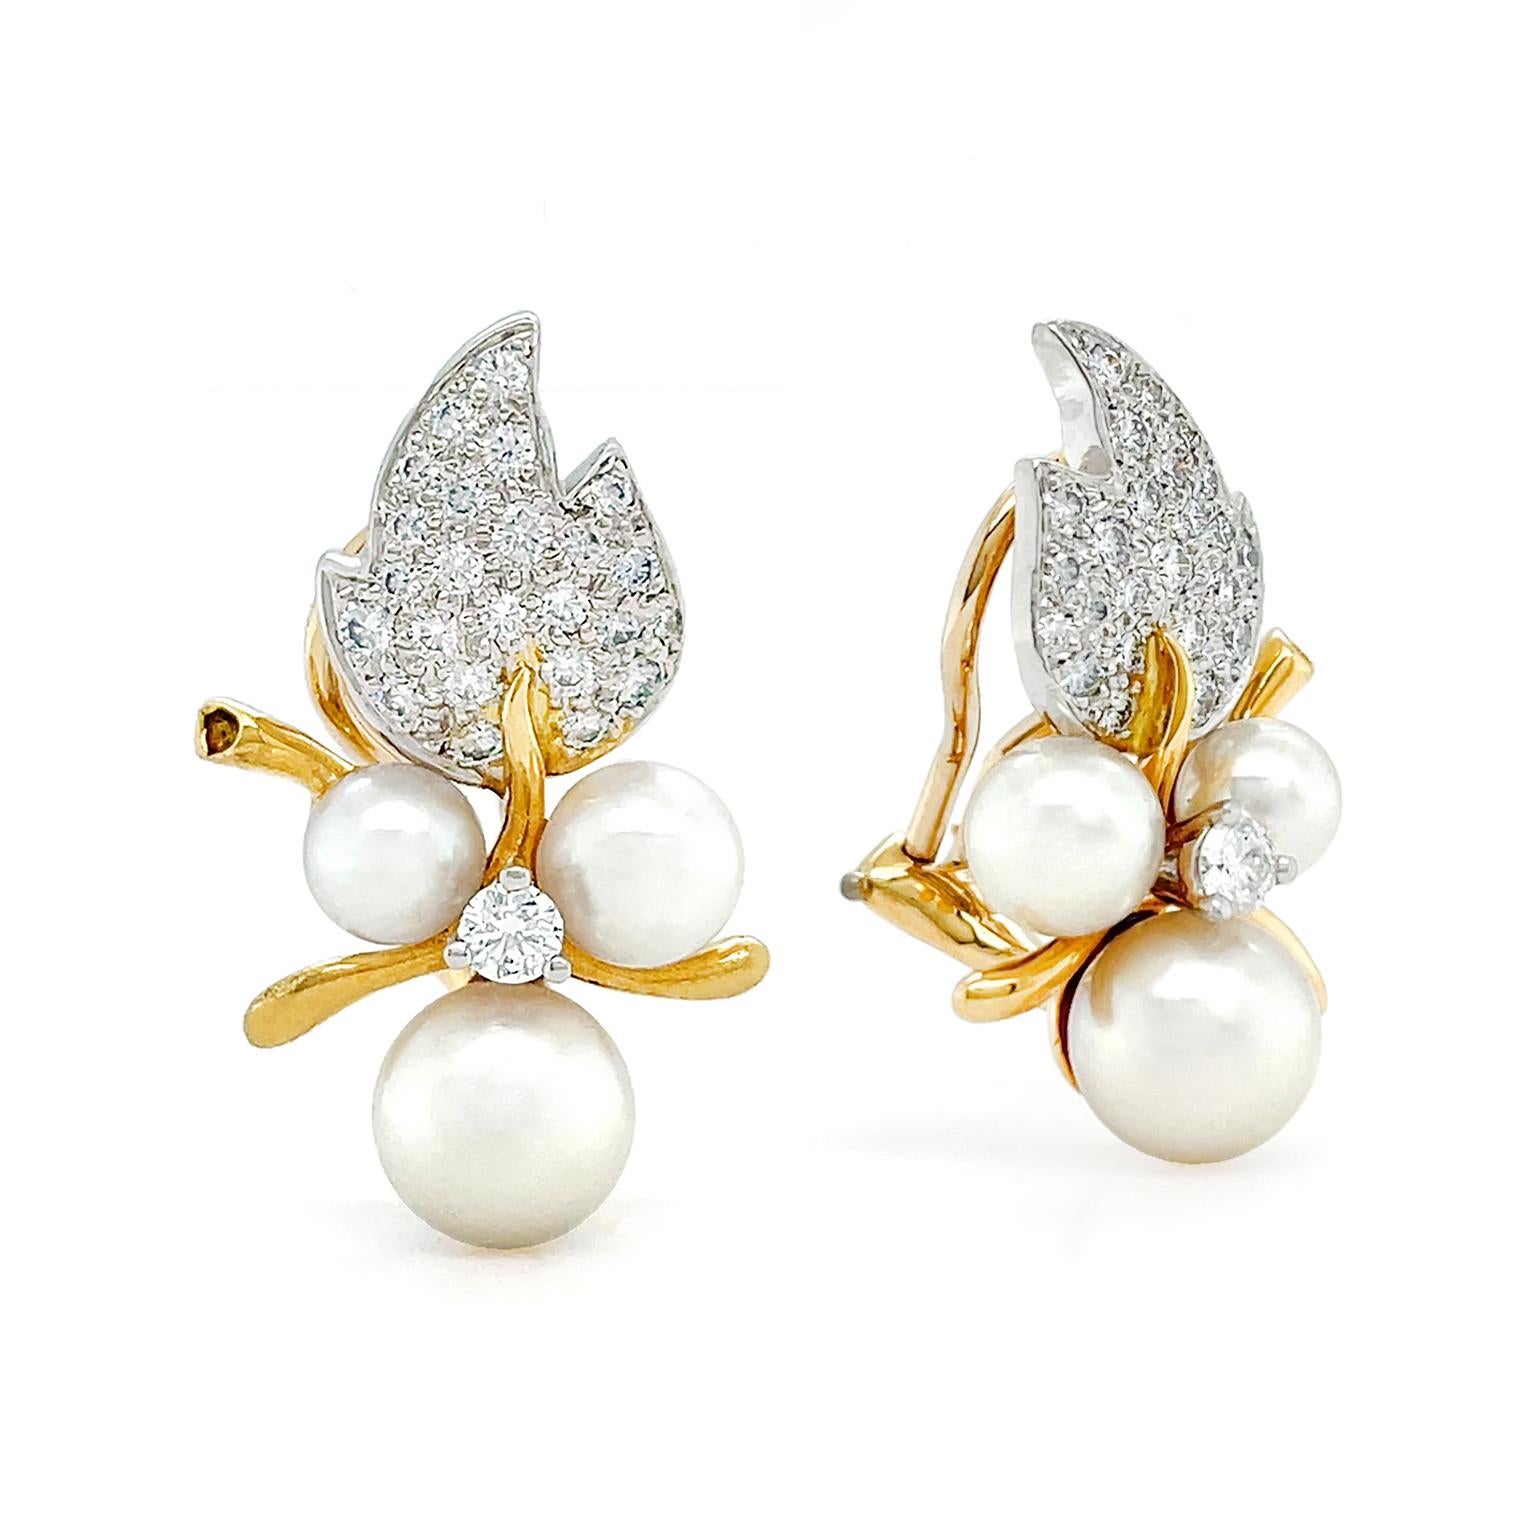 A cluster of berries is imagined in diamonds and pearls. Brilliant cut diamonds set in platinum are a three cornered leaf, while 18k yellow gold serves as the midrib. The gold also acts as the stems. Three round white pearls indicate a cluster of